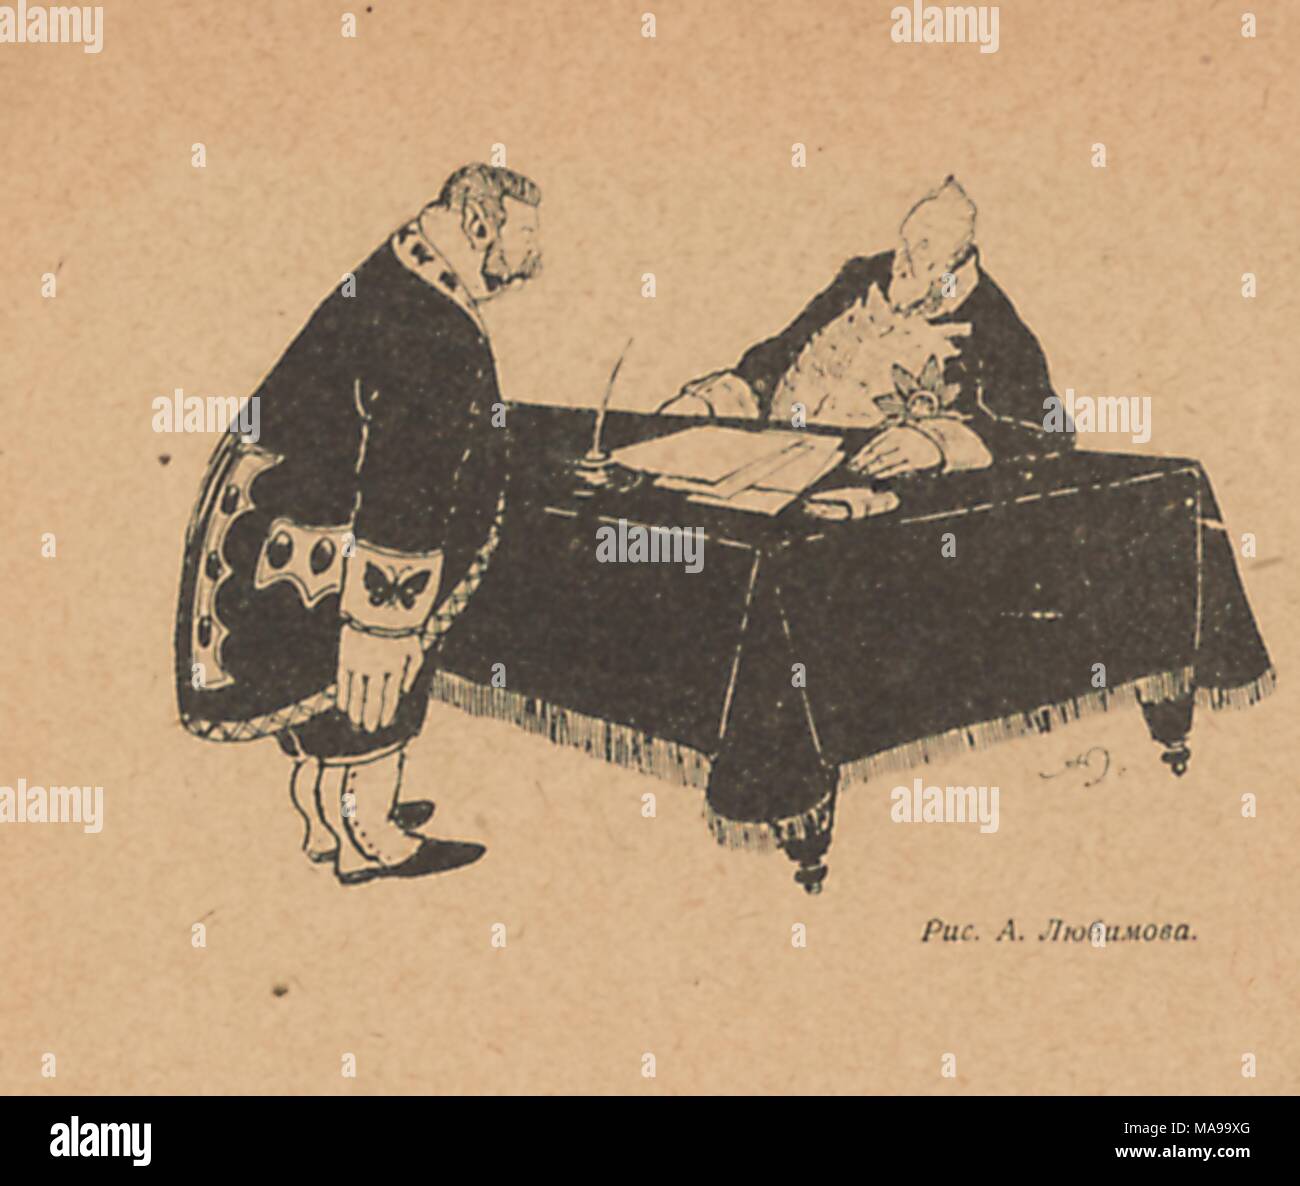 Illustration of two overweight men at opposite sides of a table with papers stacked on it, one sitting with a surprised expression and one standing, both dressed in formal jackets with butterfly and flower insignia, from the Russian satirical publication Signaly (Signals), 1906. () Stock Photo